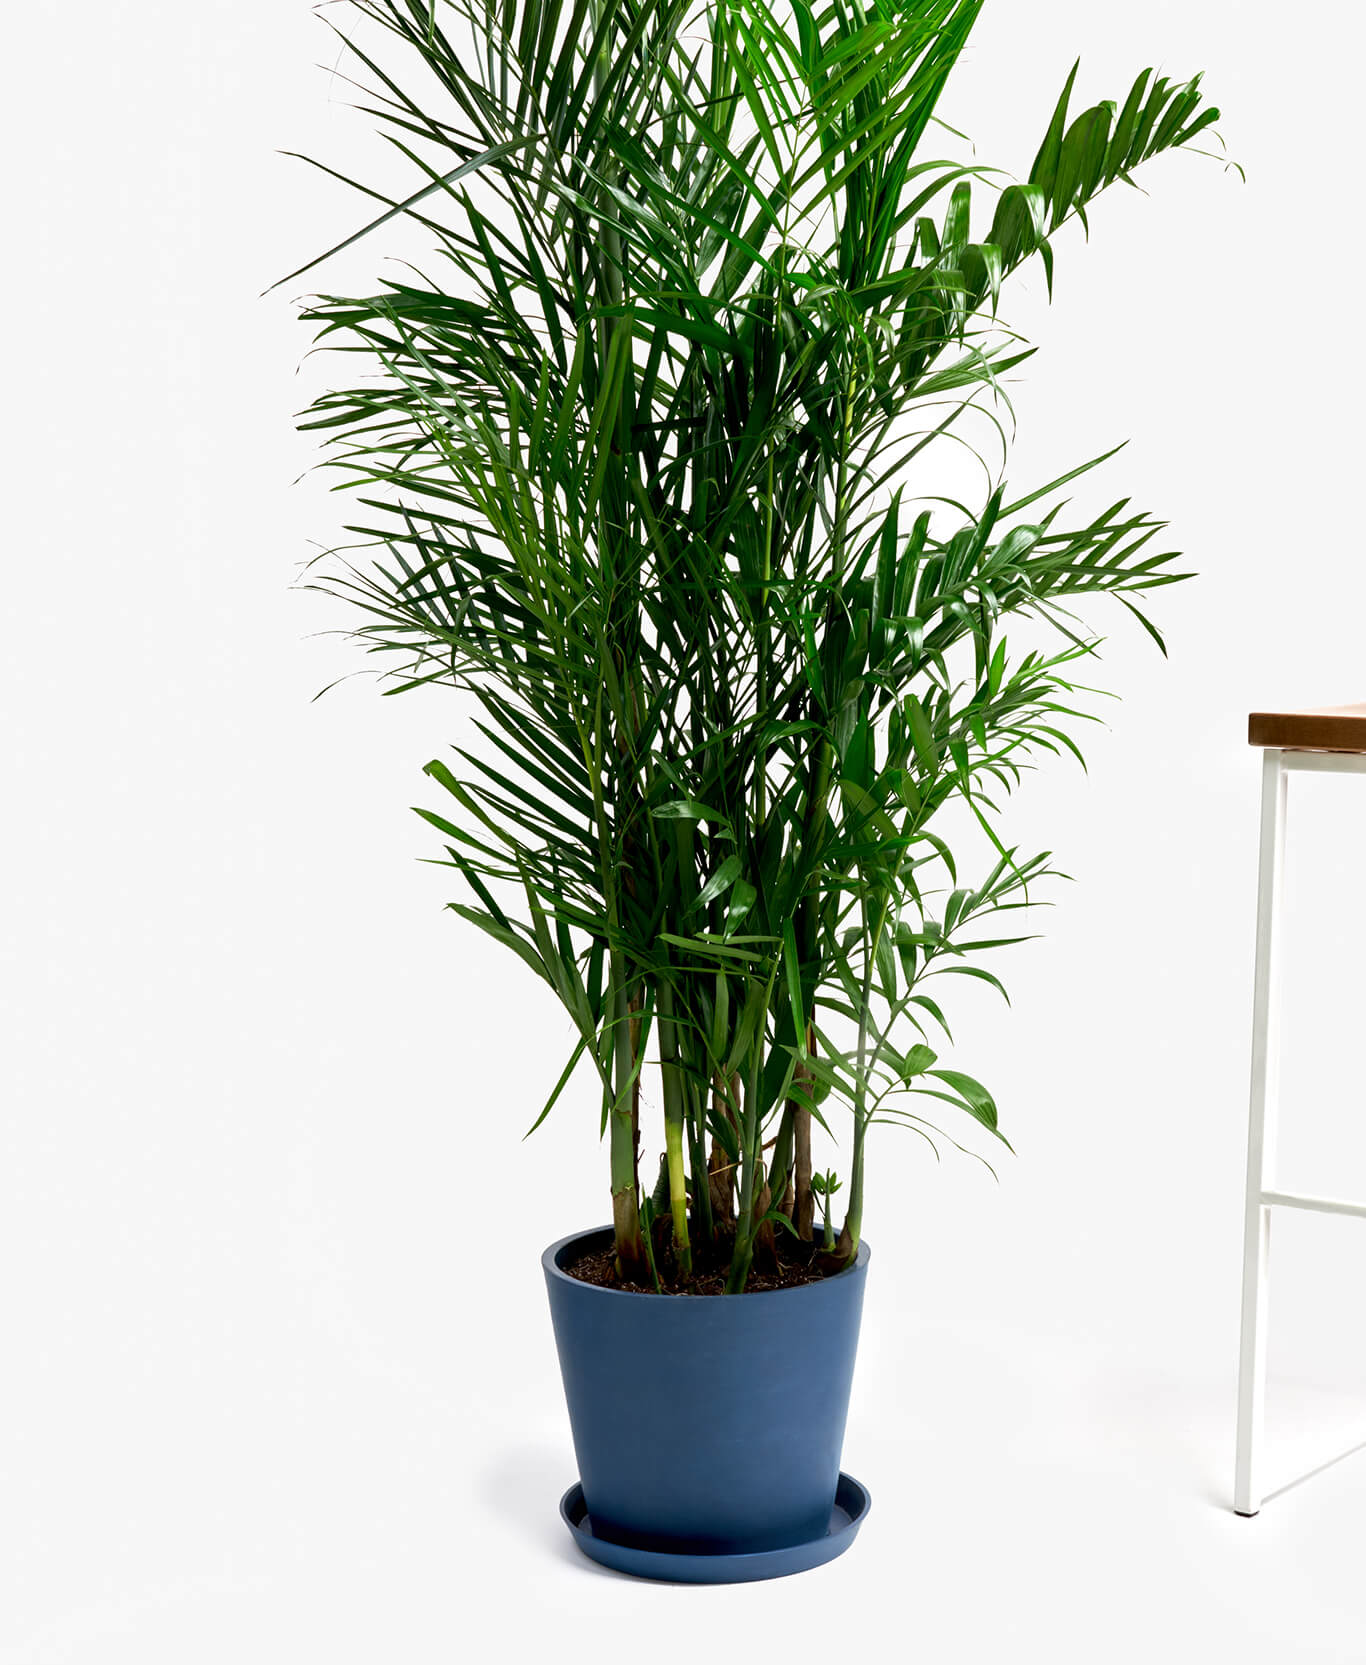 bamboo palm indoor plant potted bloomscape indigo choose color slate clay option